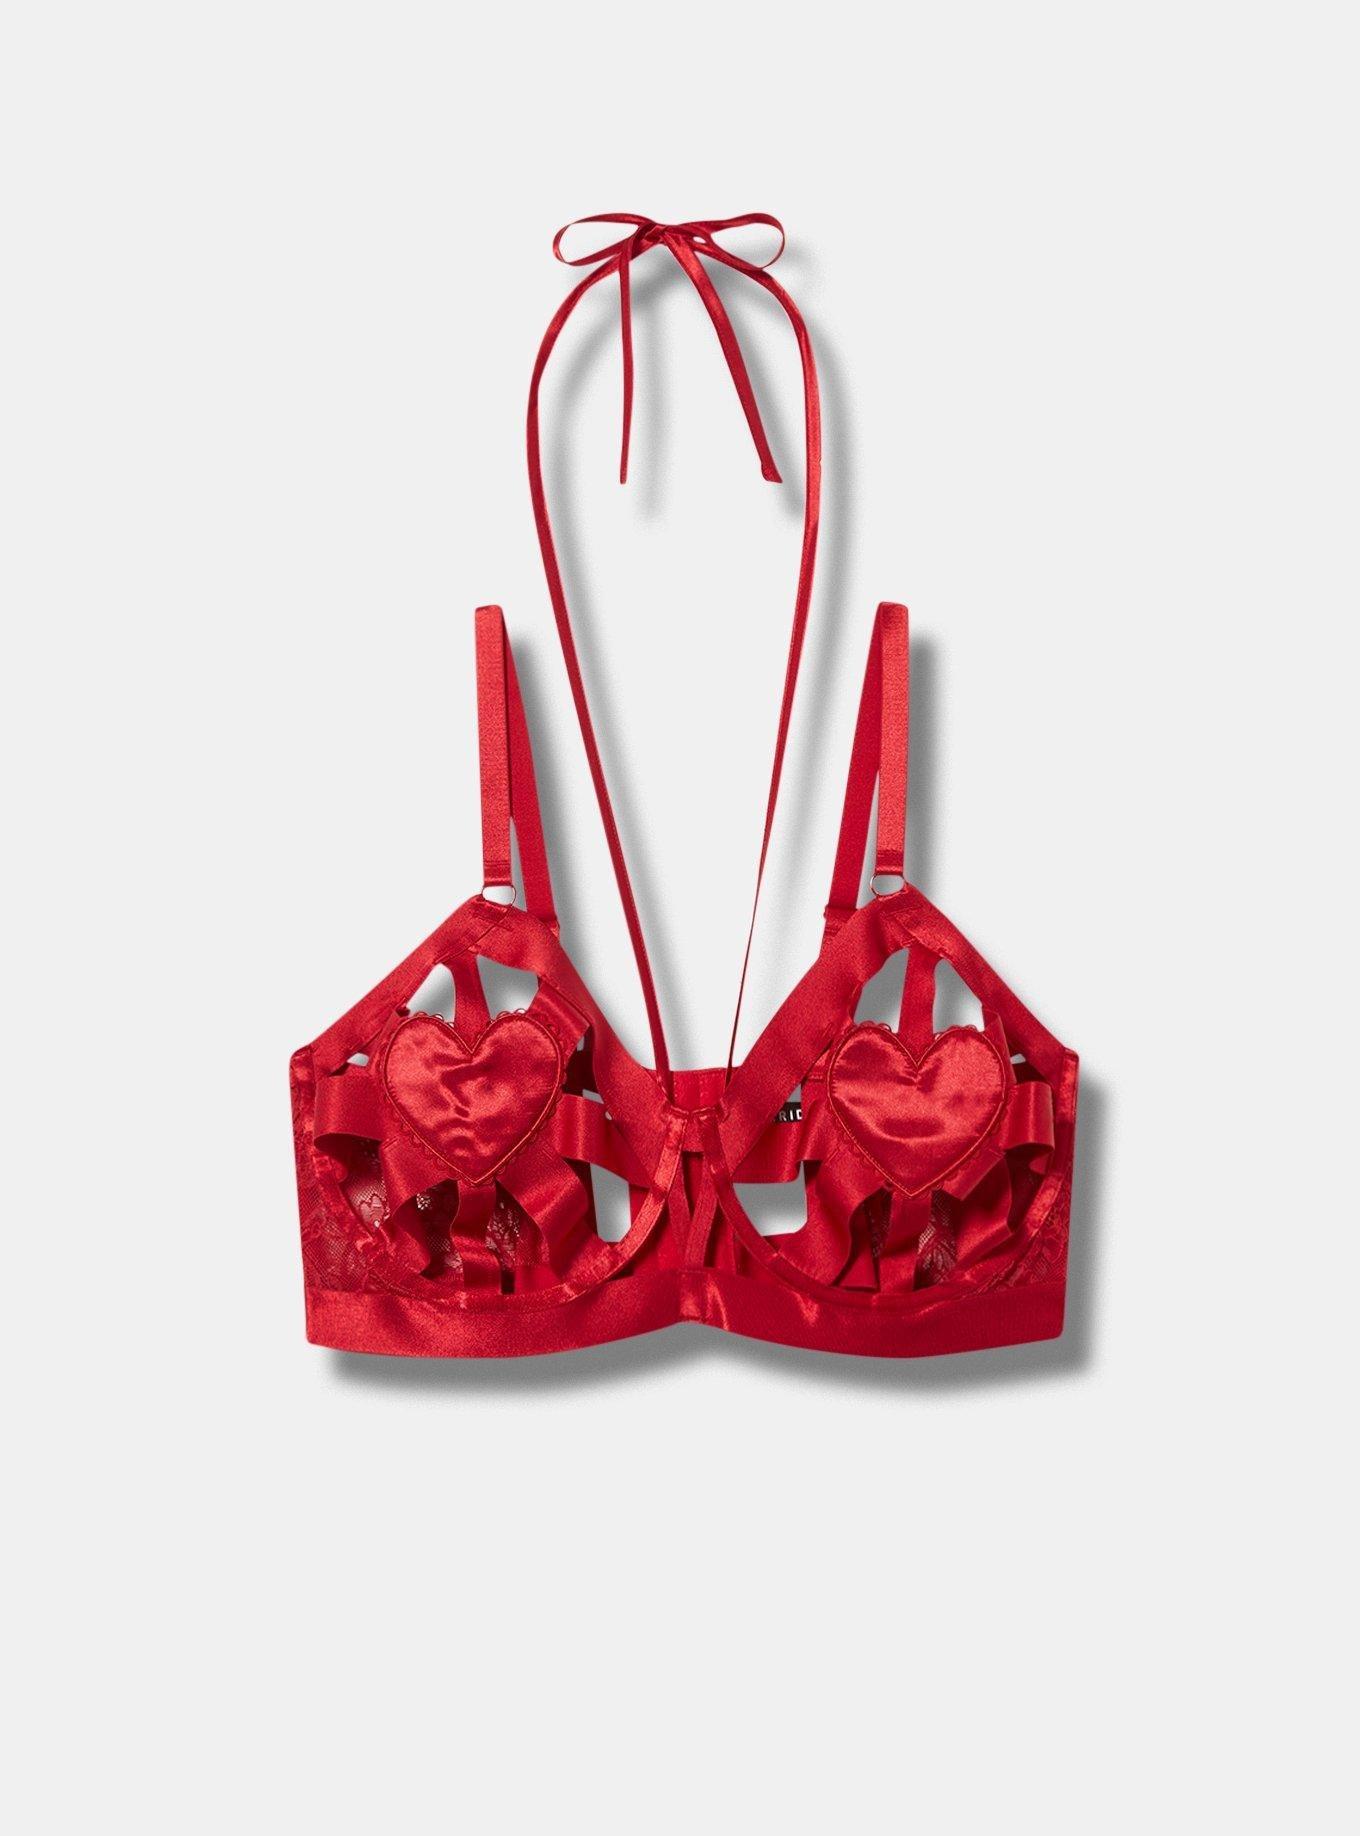 Shein Red Heart Design Double Strap Bra Women's Size Large C Cup 